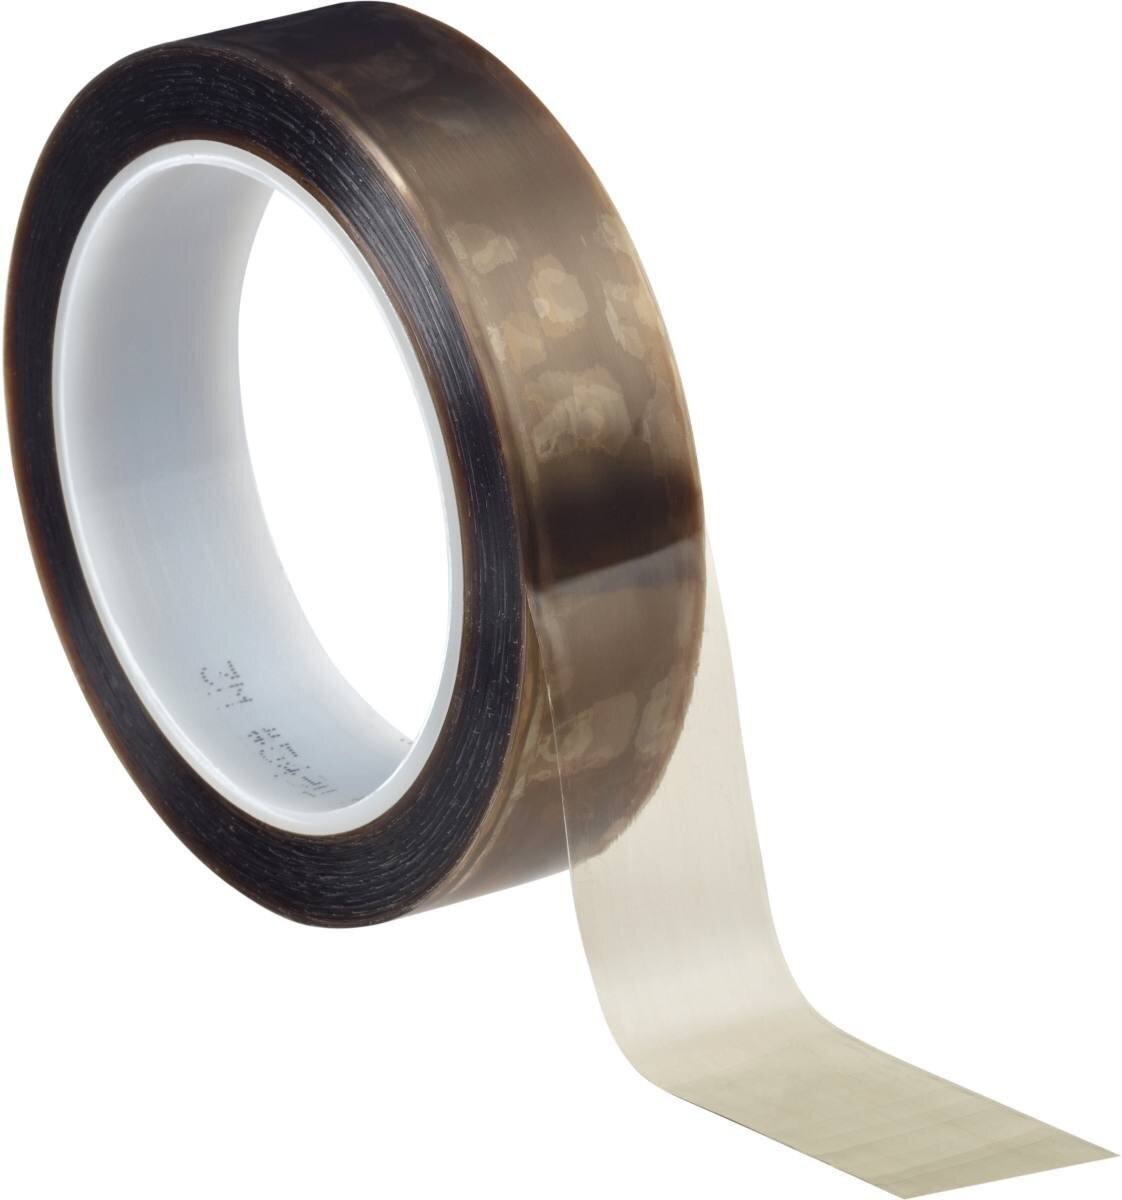 3M 5491 PTFE extruded film adhesive tape 355mmx33m, 0.17mm, silicone